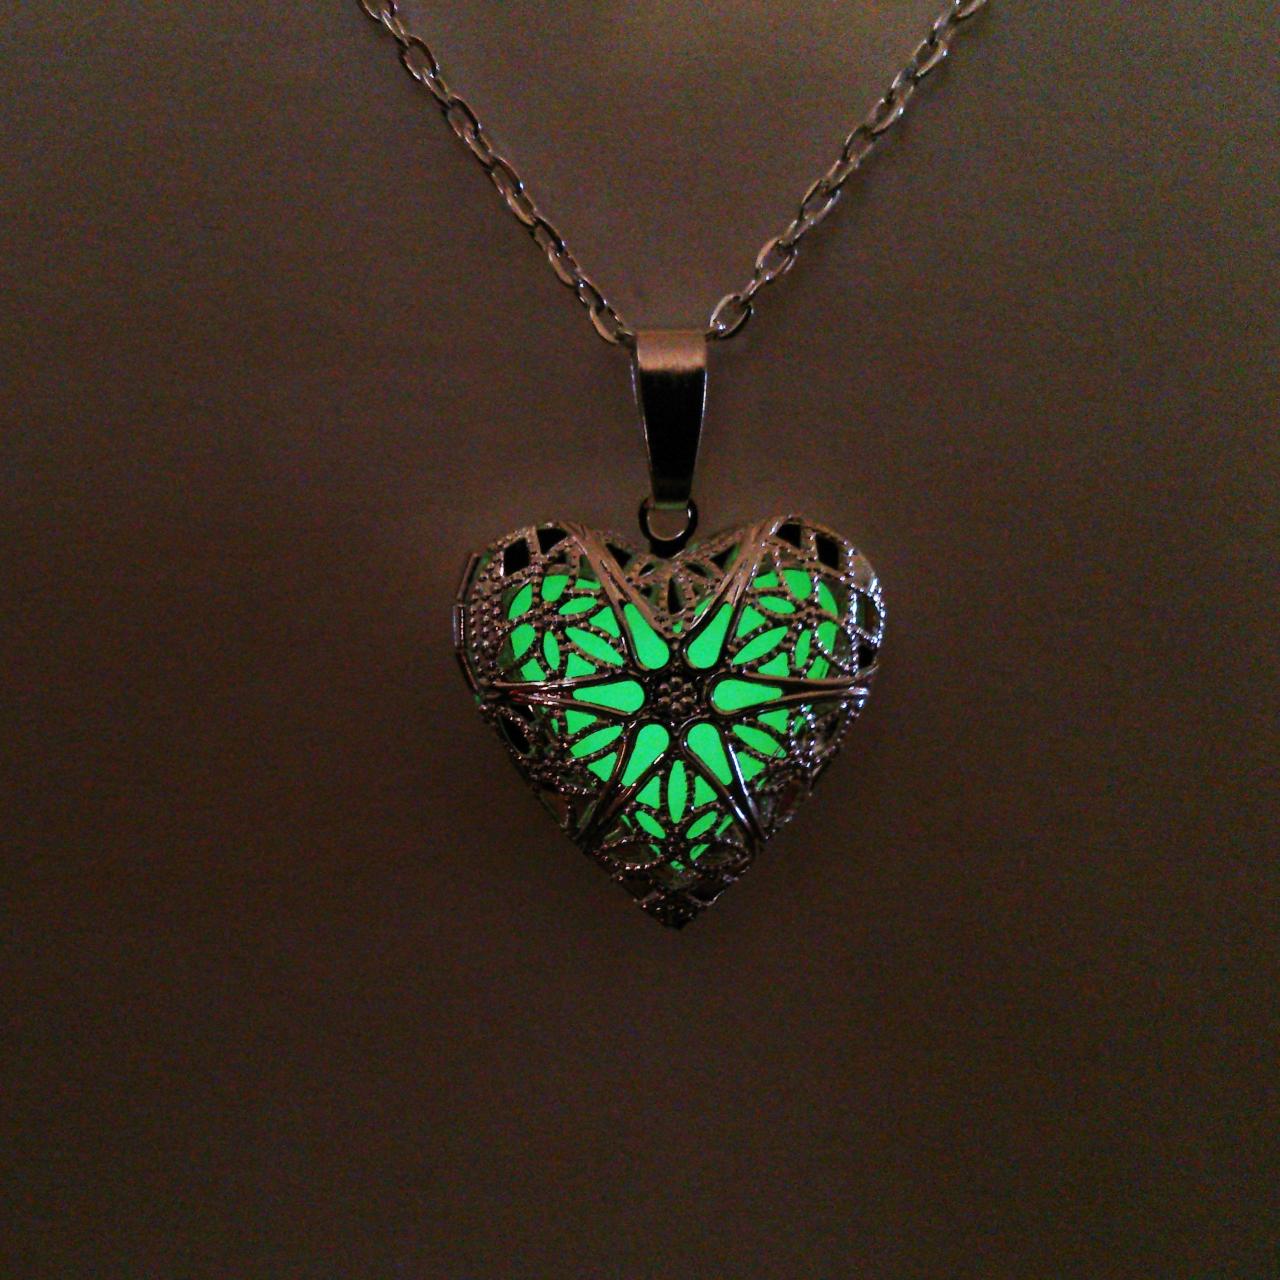 Green Glow In The Dark Necklace // Glowing Heart Pendant // Filigree Glow Jewelry // Teen Gift// Gifts For Her // Christmas Gift